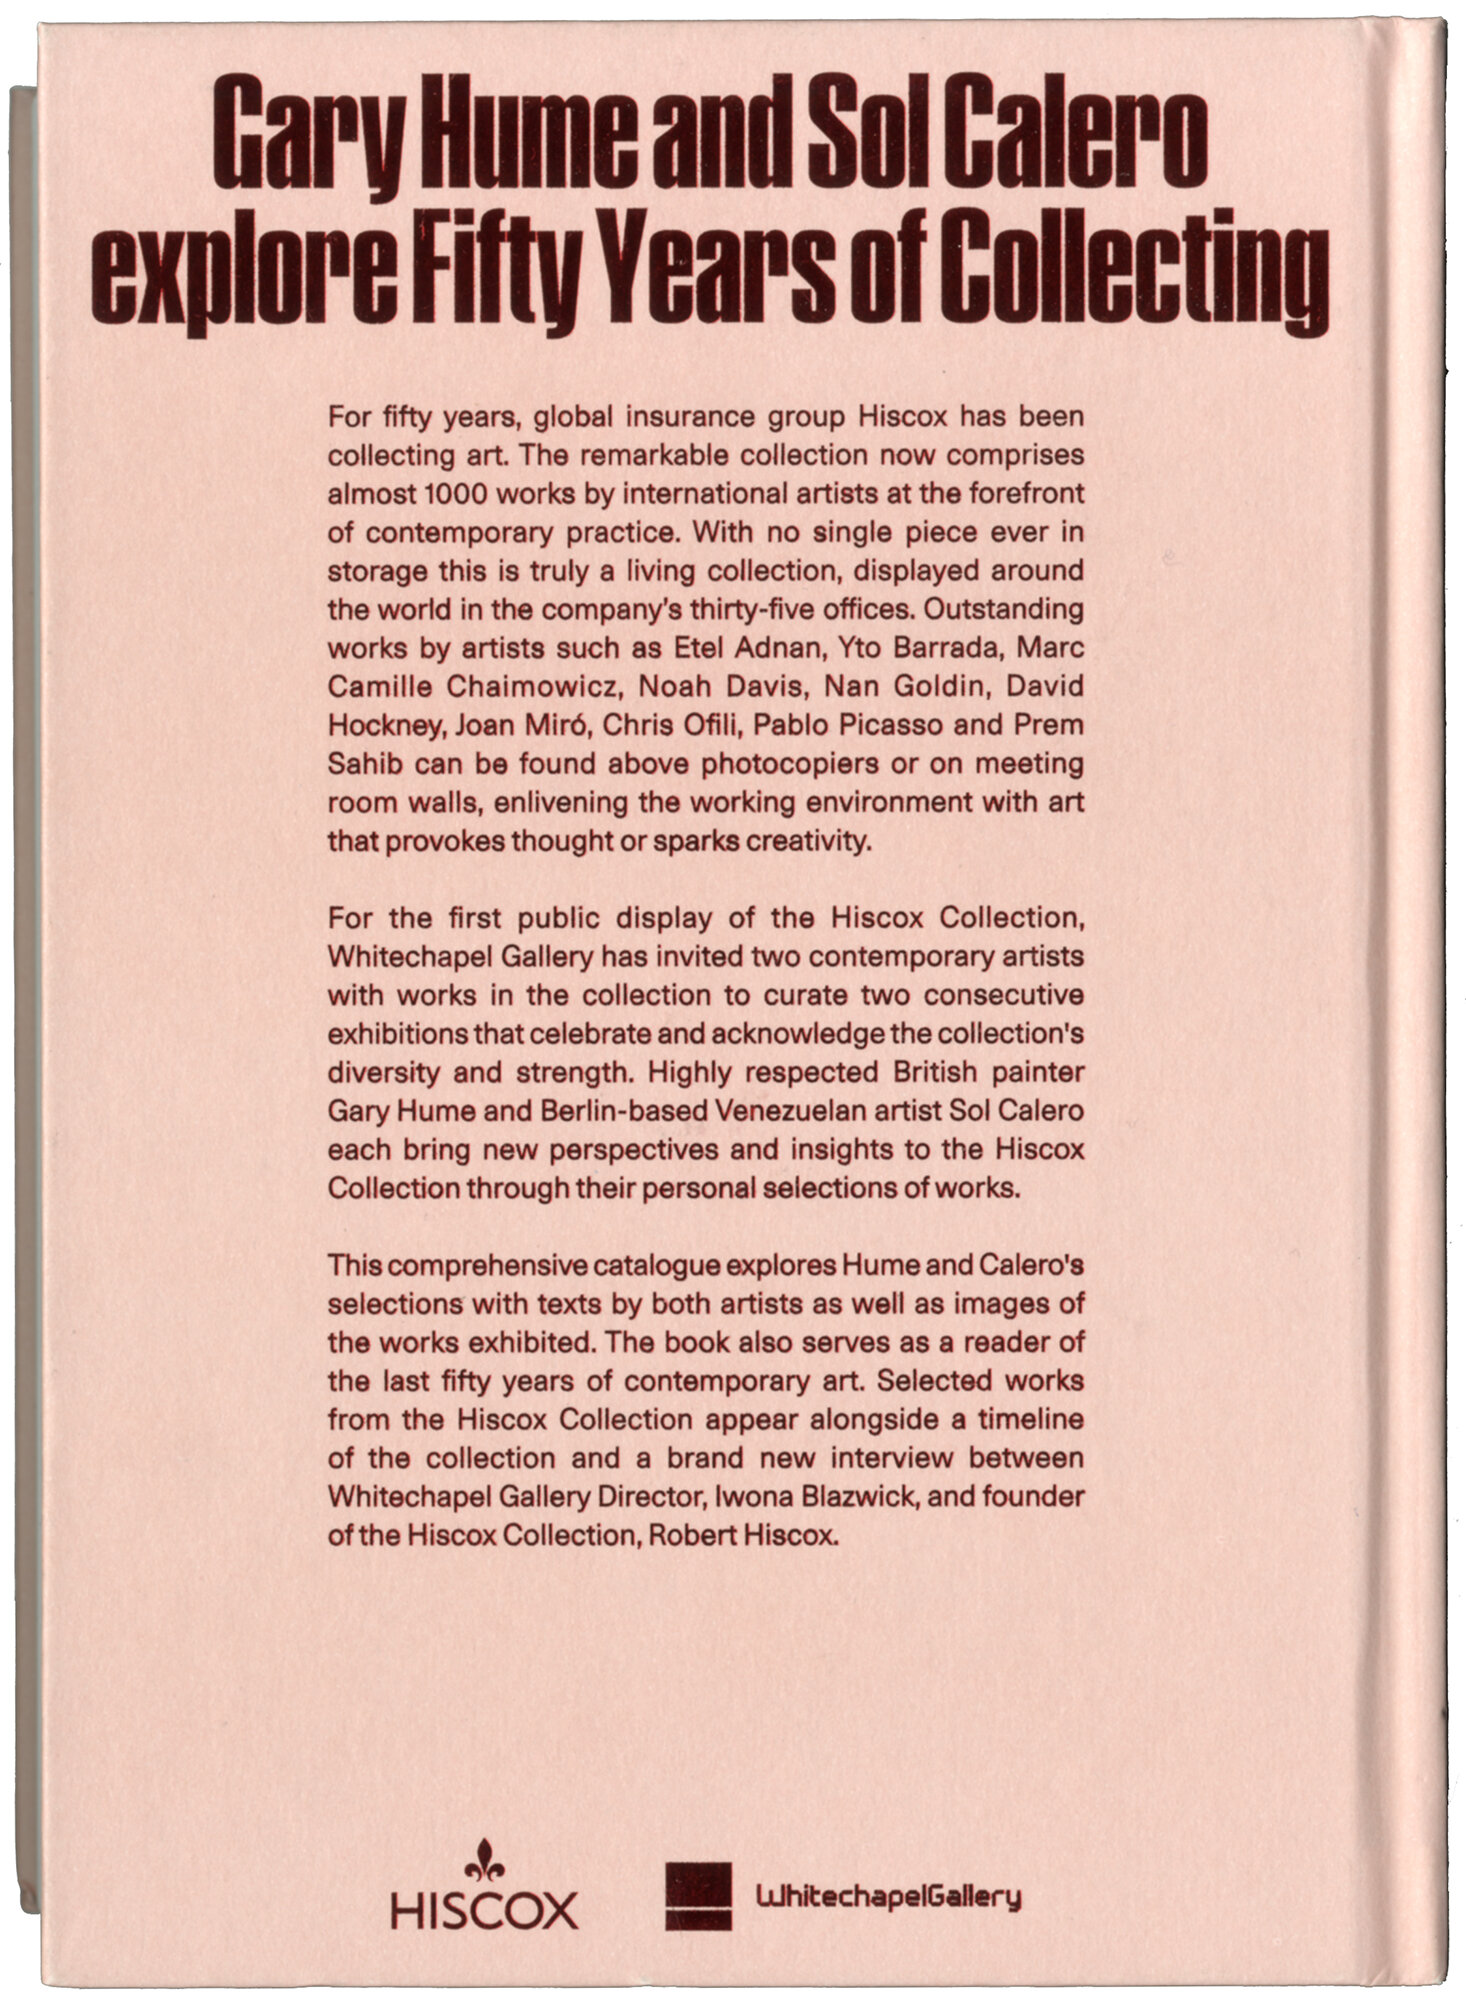 50 Years of Art_The Hiscox Collection03.jpg